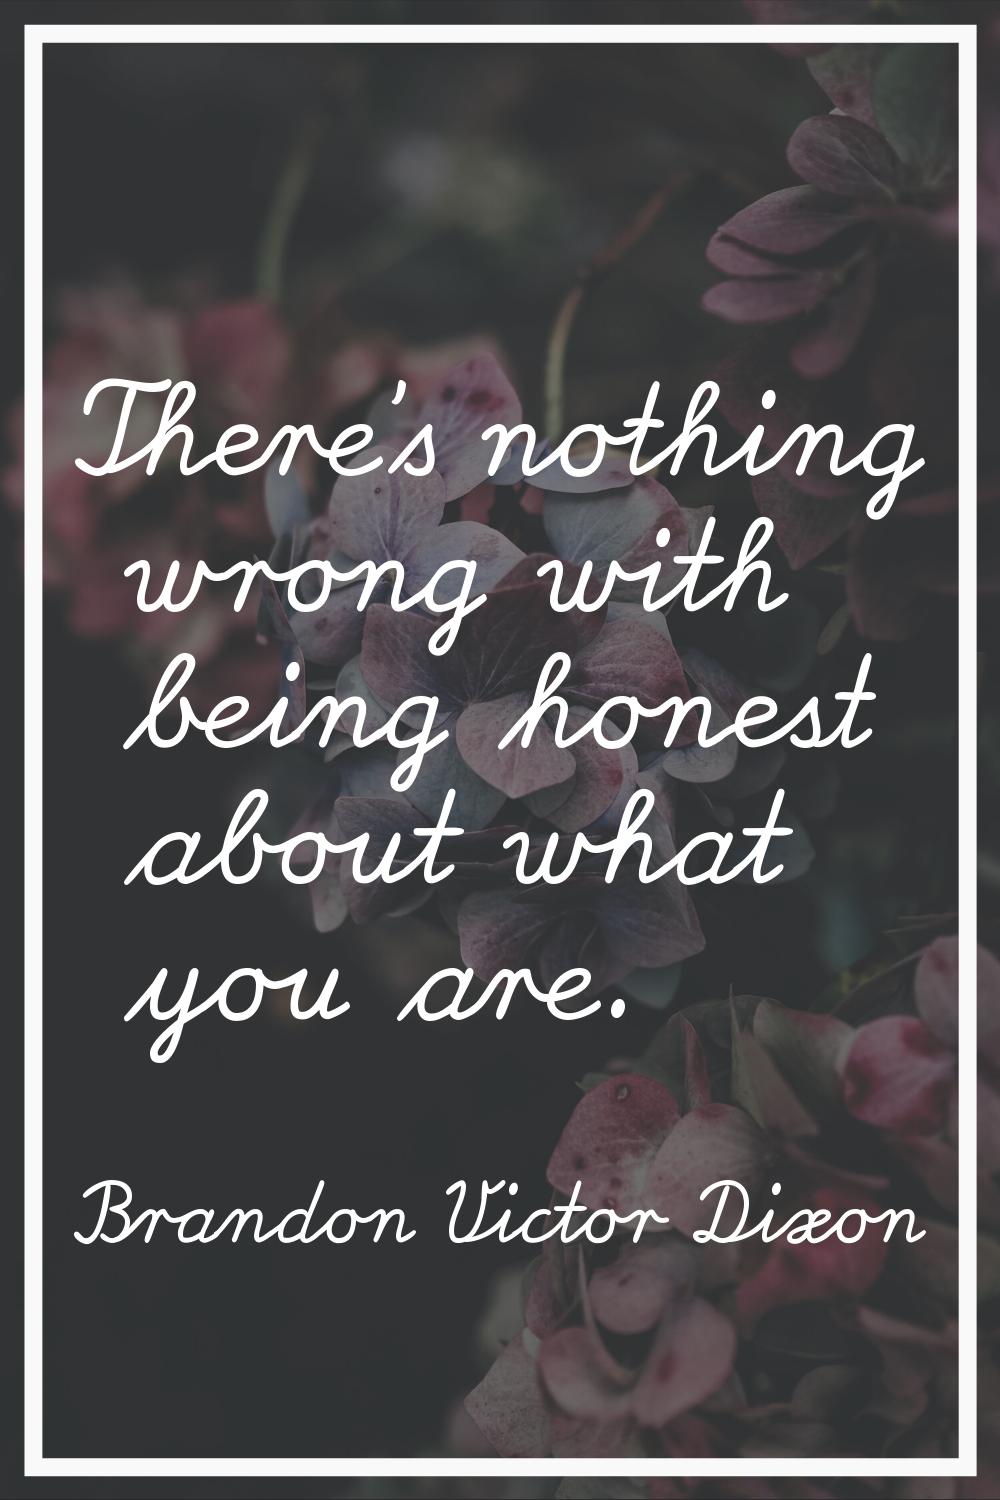 There's nothing wrong with being honest about what you are.